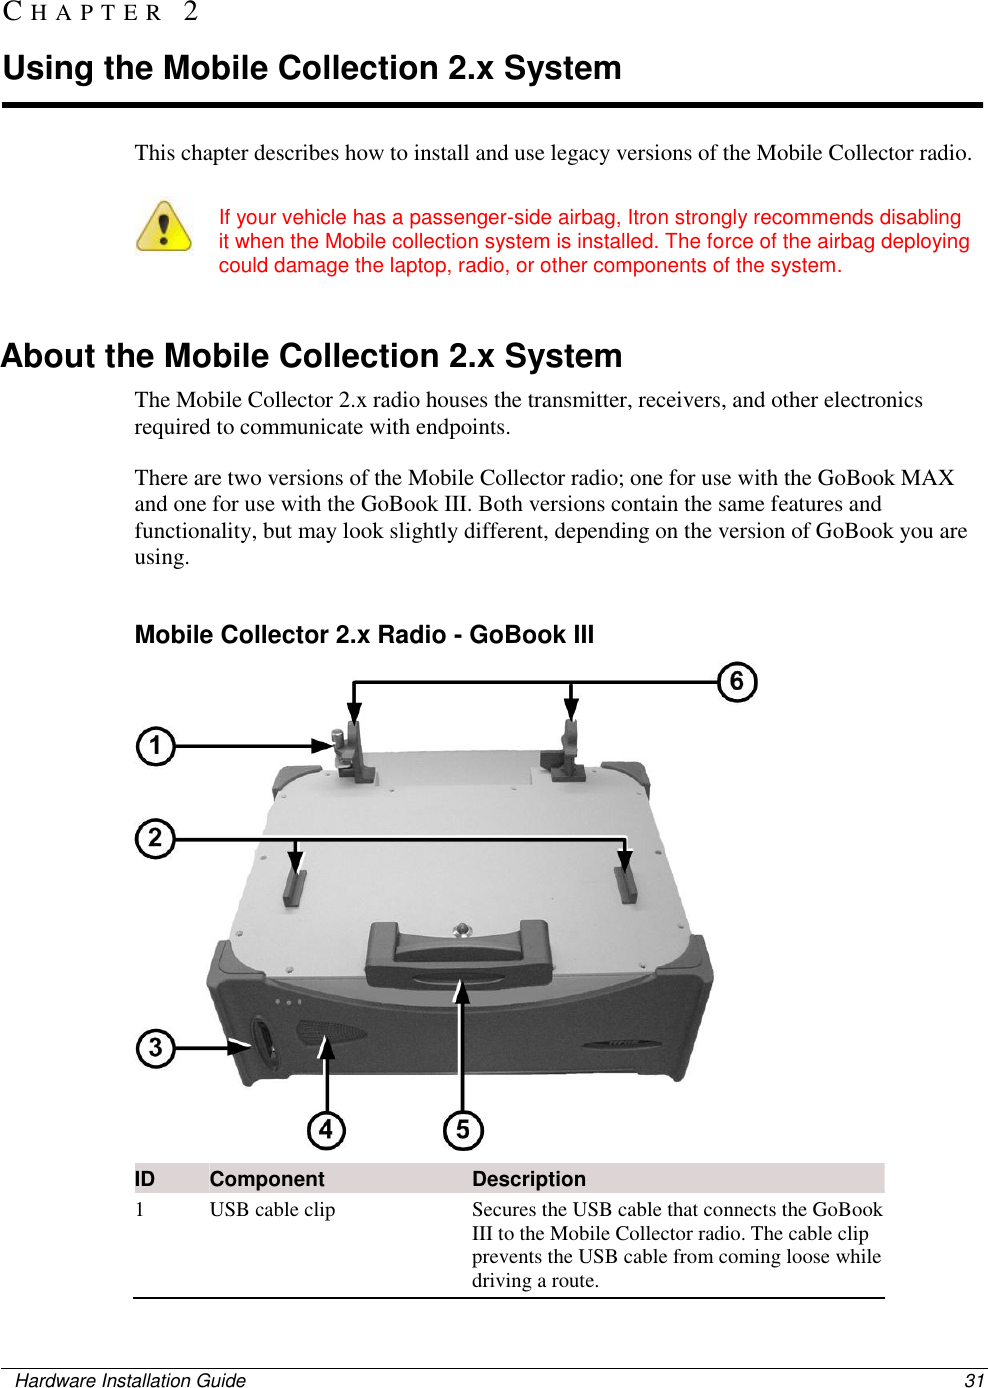    Hardware Installation Guide  31  This chapter describes how to install and use legacy versions of the Mobile Collector radio.     If your vehicle has a passenger-side airbag, Itron strongly recommends disabling it when the Mobile collection system is installed. The force of the airbag deploying could damage the laptop, radio, or other components of the system.     About the Mobile Collection 2.x System The Mobile Collector 2.x radio houses the transmitter, receivers, and other electronics required to communicate with endpoints.  There are two versions of the Mobile Collector radio; one for use with the GoBook MAX and one for use with the GoBook III. Both versions contain the same features and functionality, but may look slightly different, depending on the version of GoBook you are using.  Mobile Collector 2.x Radio - GoBook III   ID Component Description 1 USB cable clip  Secures the USB cable that connects the GoBook III to the Mobile Collector radio. The cable clip prevents the USB cable from coming loose while driving a route.  CH A P T E R   2  Using the Mobile Collection 2.x System 